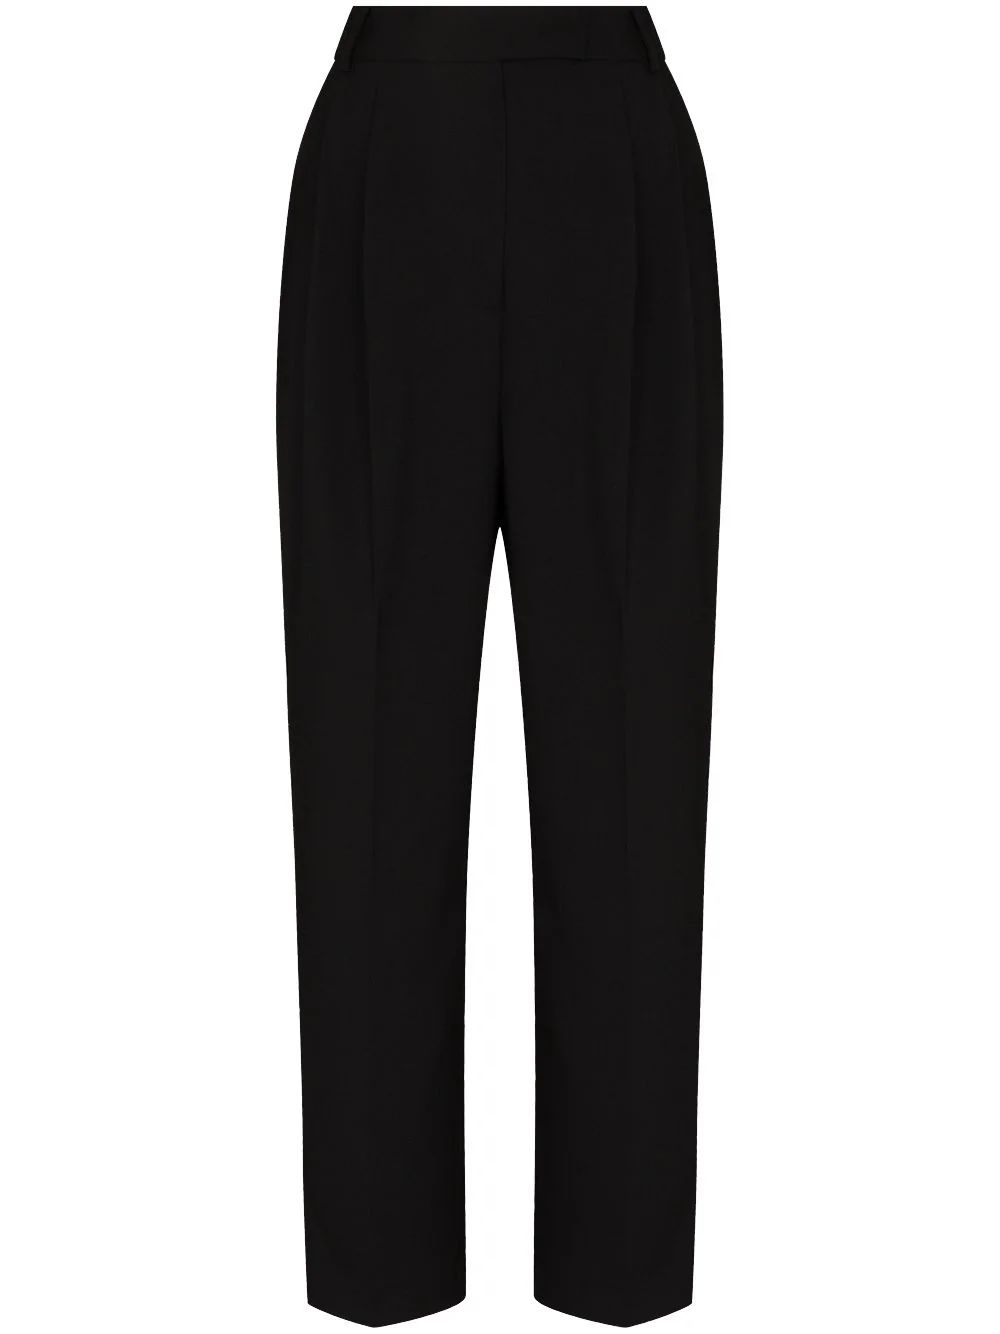 The Frankie Shop Bea Tailored Cropped Trousers - Farfetch | Farfetch Global